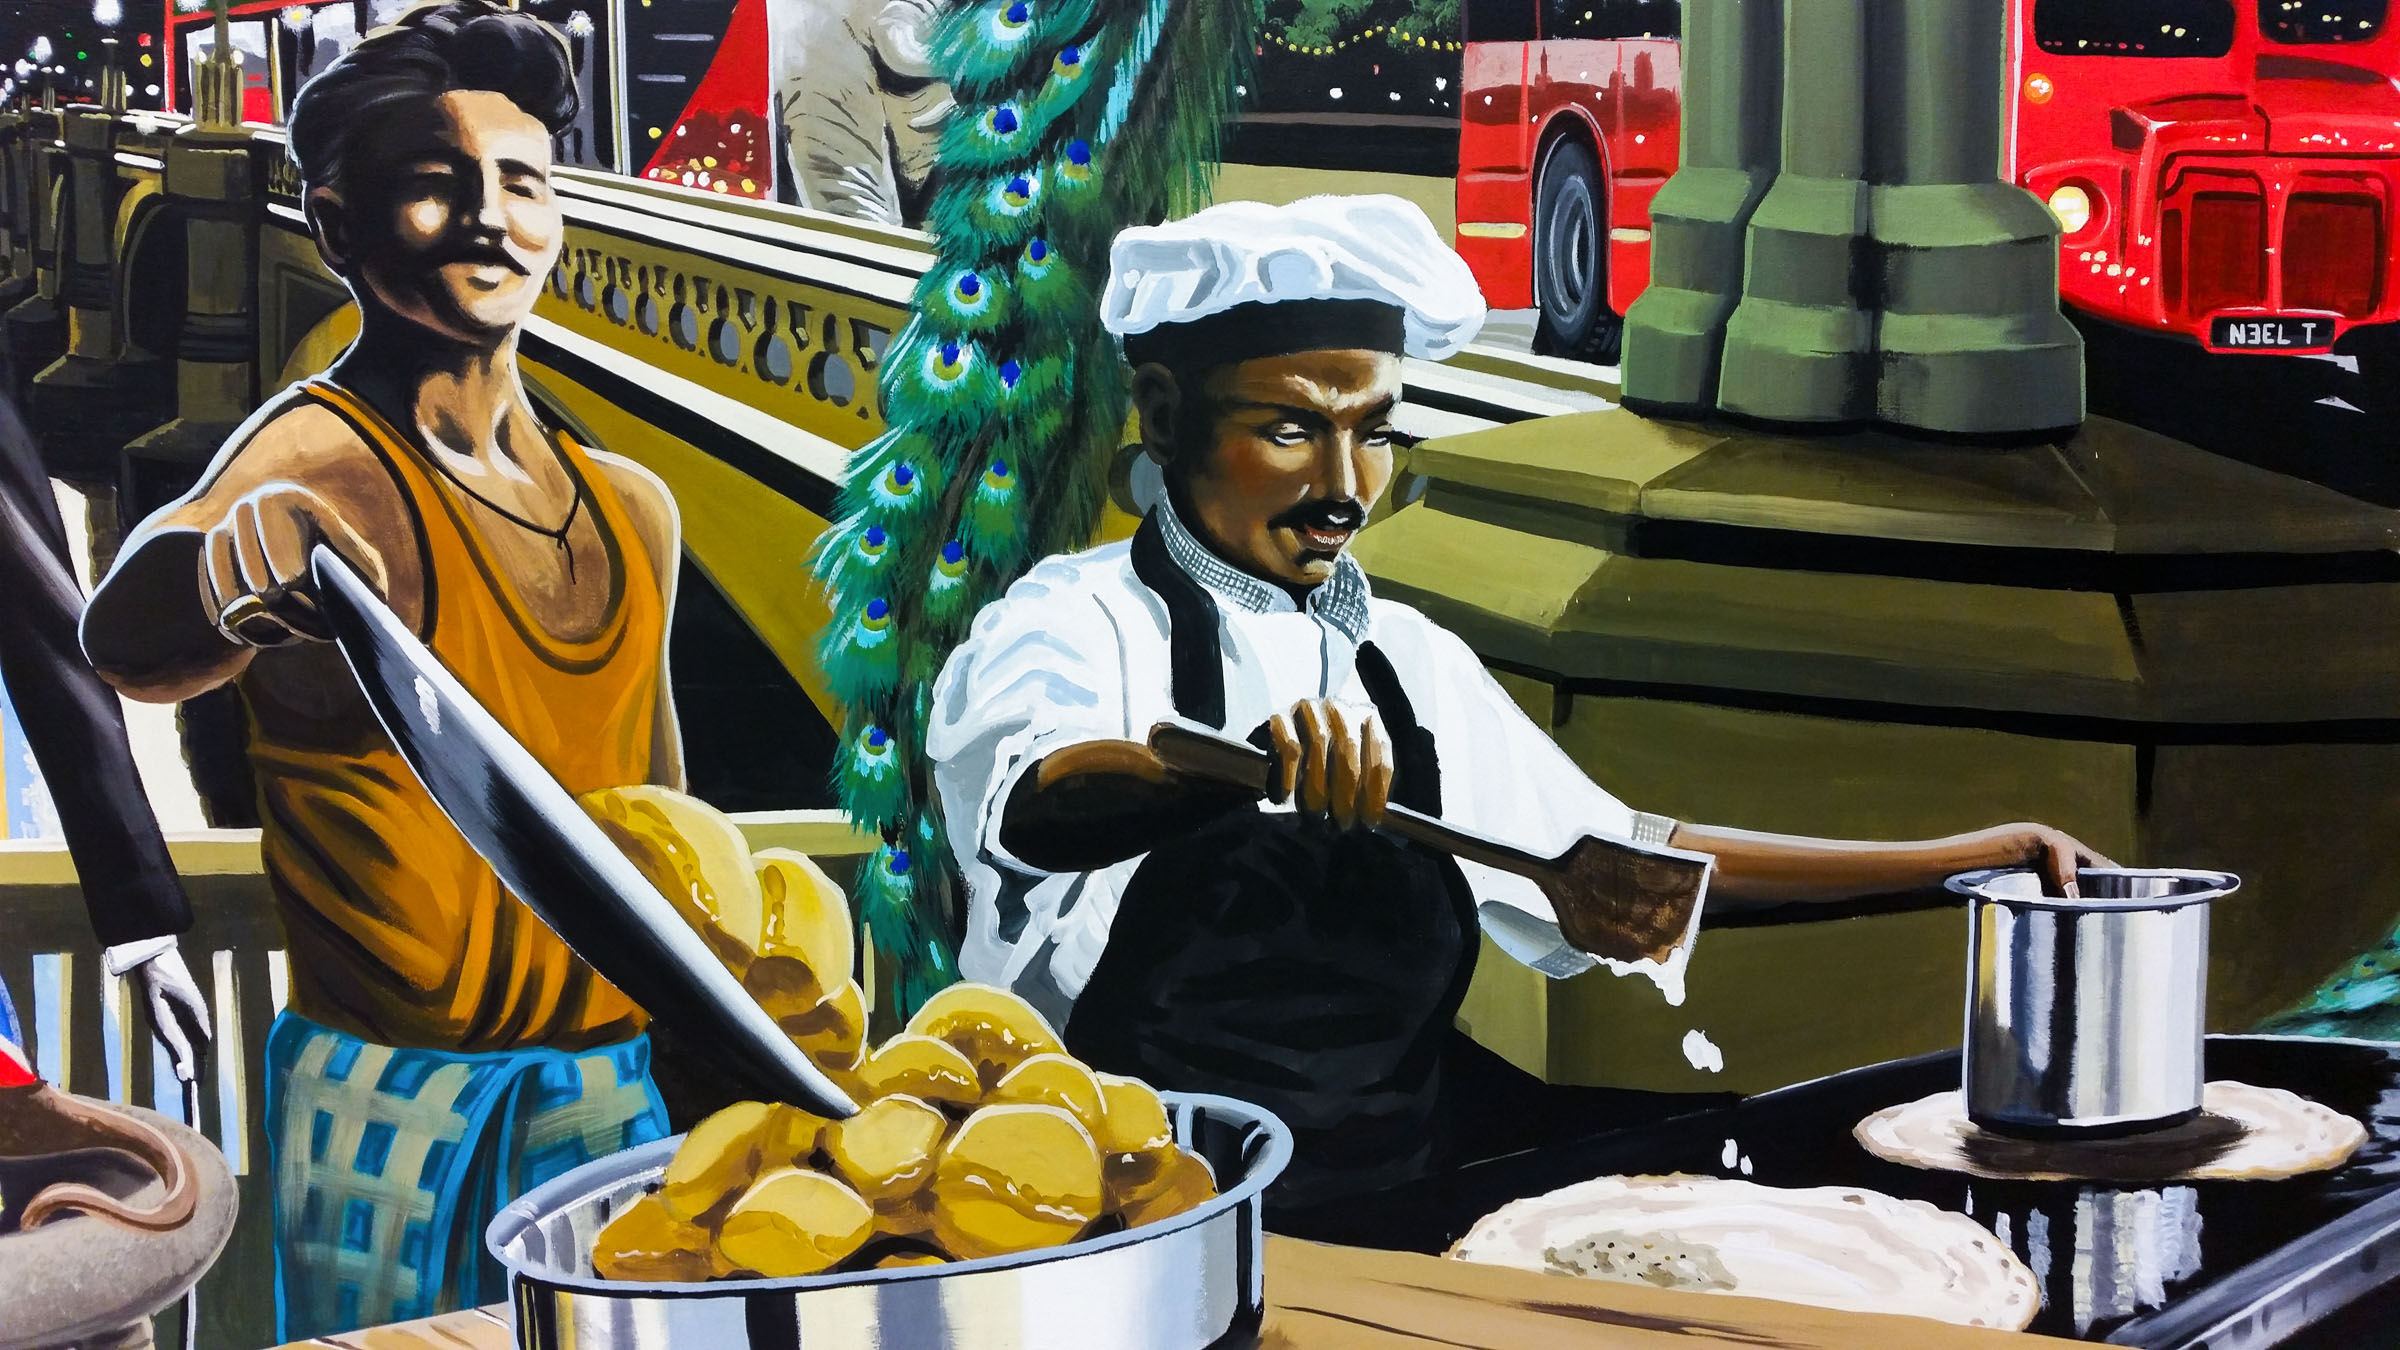 Mural shows Indian Street food, puri and dosa